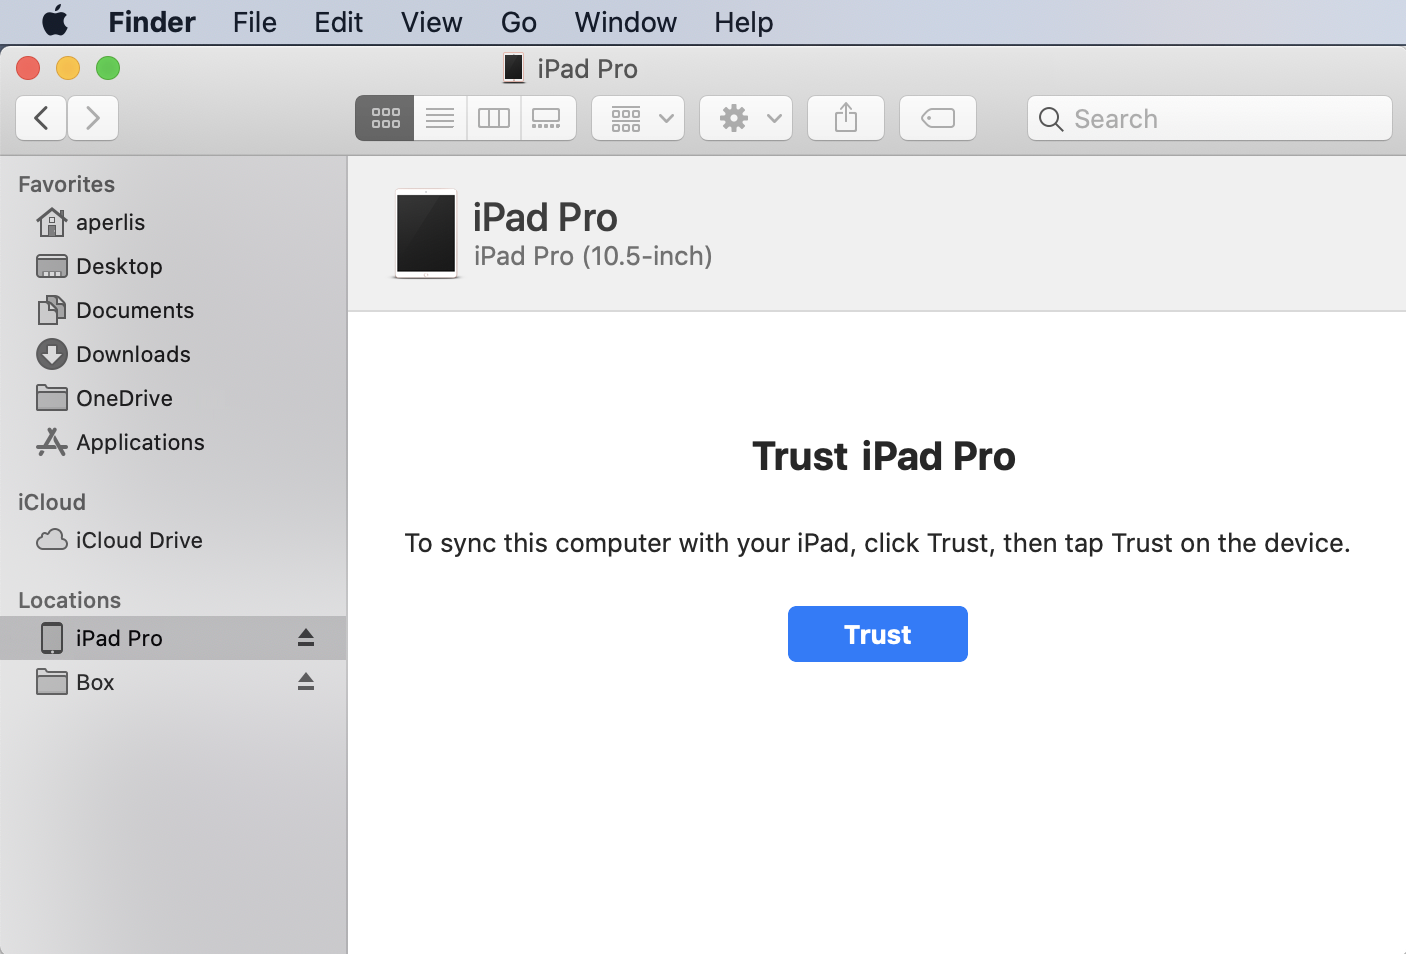 Screenshot of Macintosh Finder showing Trust button after connecting iPad for the first time